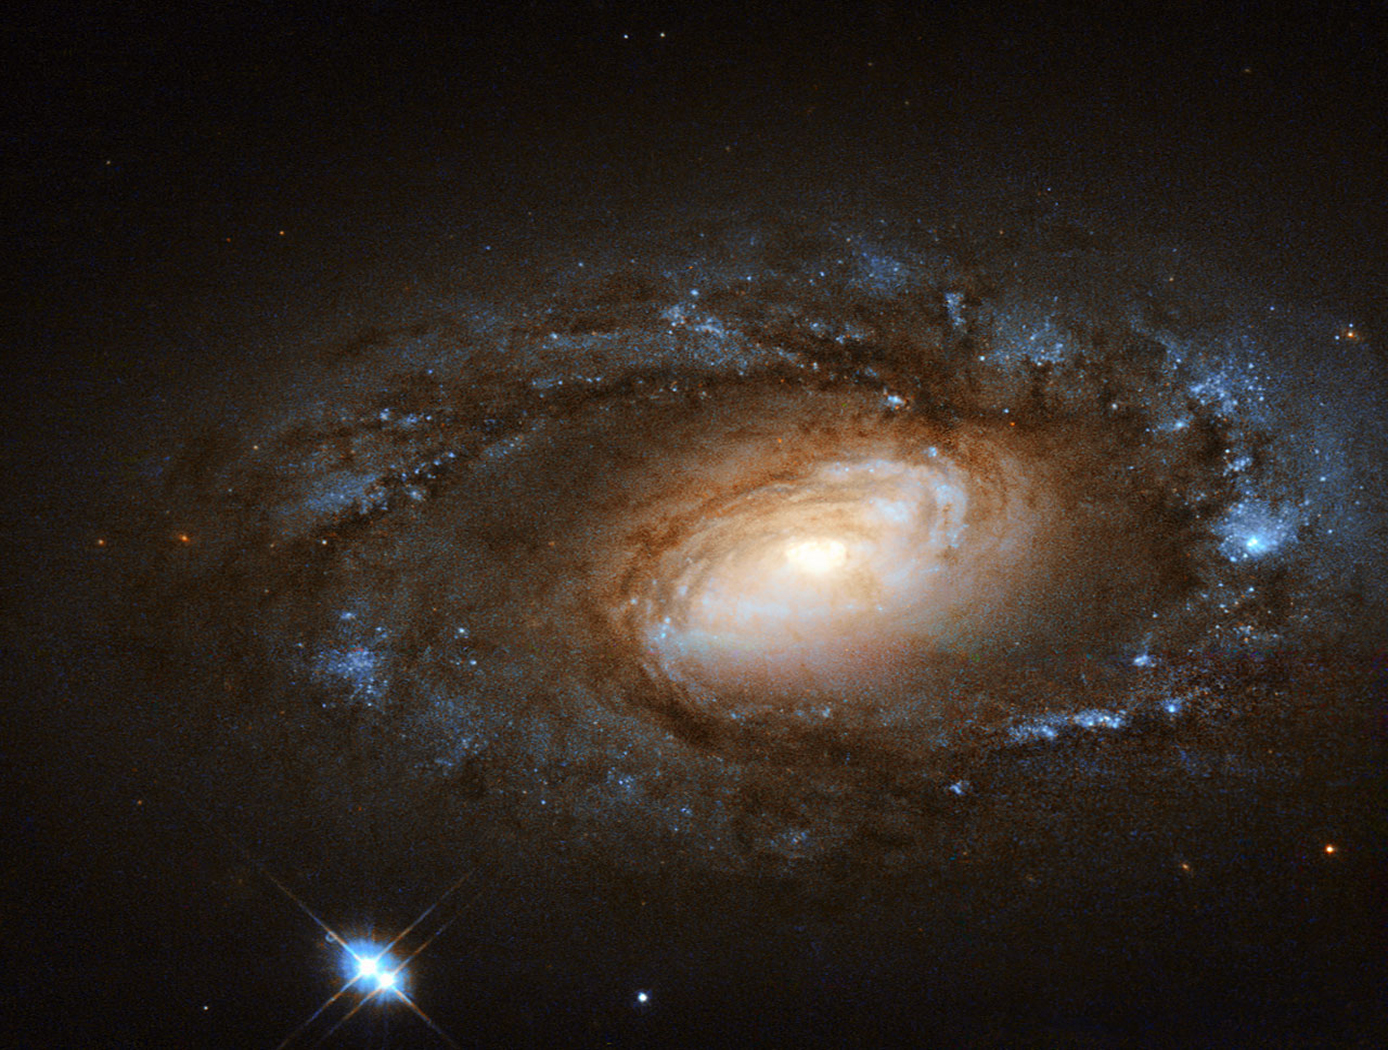 Hubble Spies Charming Spiral Galaxy Bursting with Stars